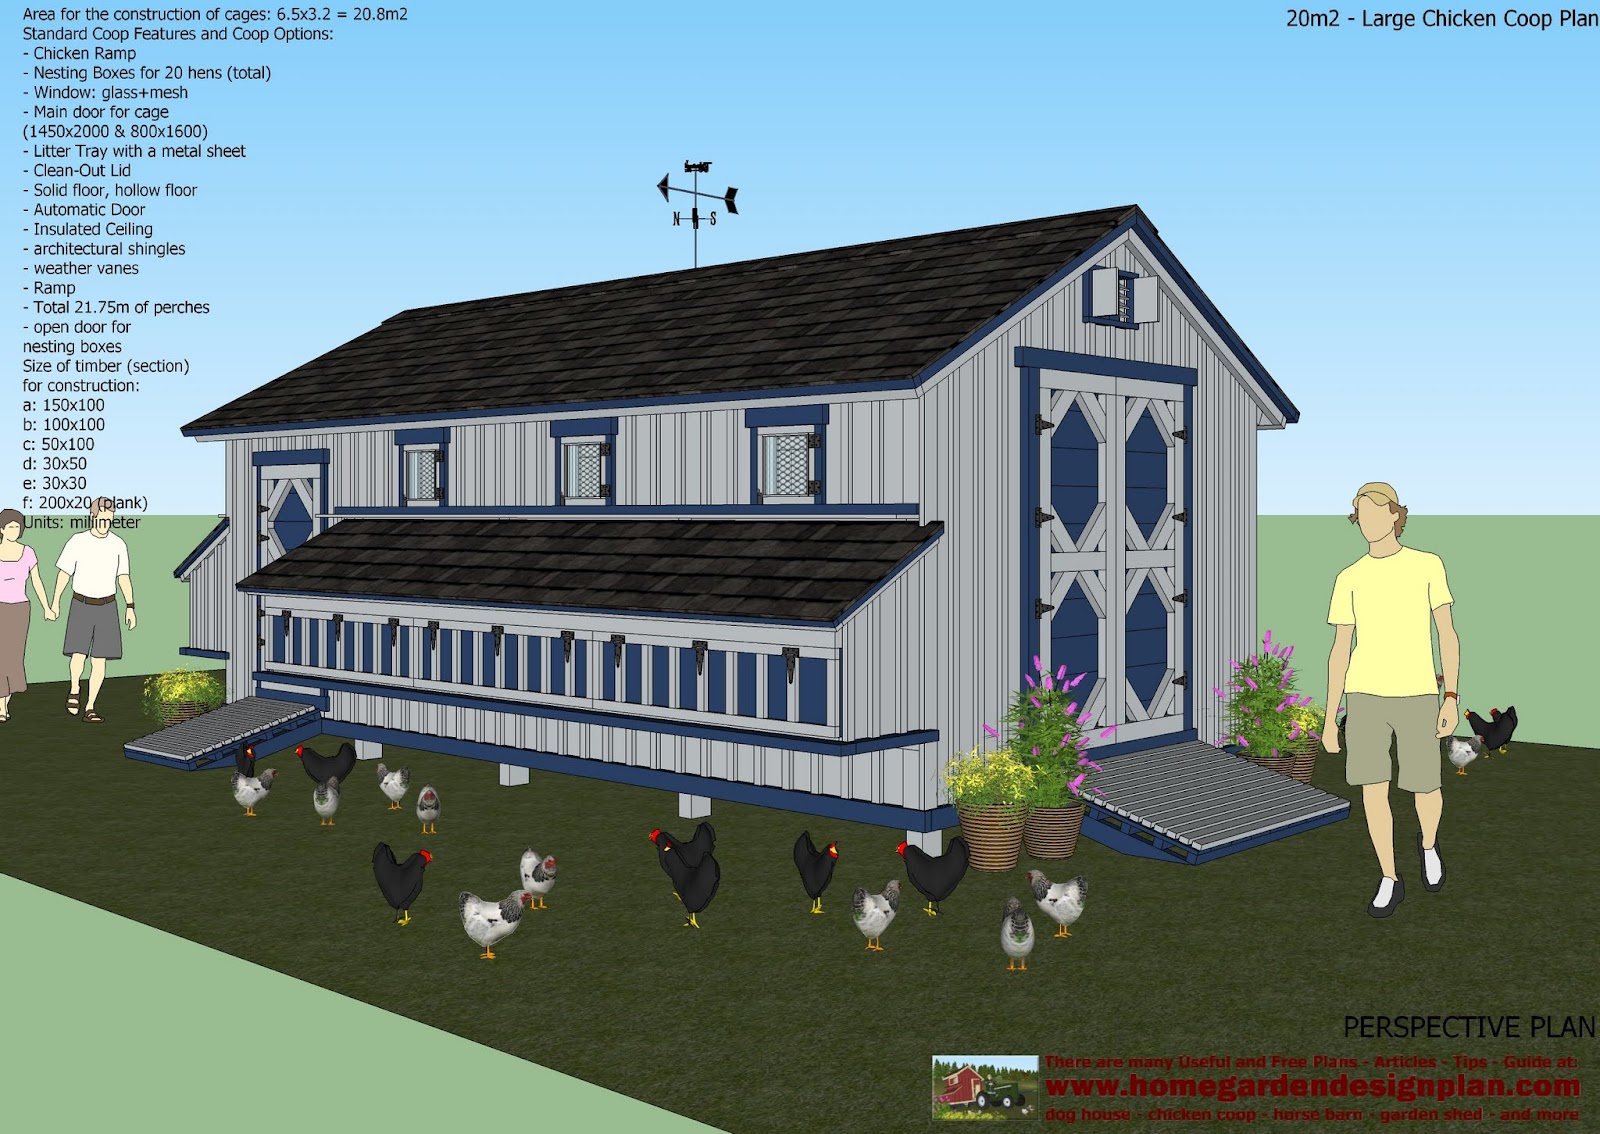 Chicken coop to build: Chicken coop plans for 10 chickens